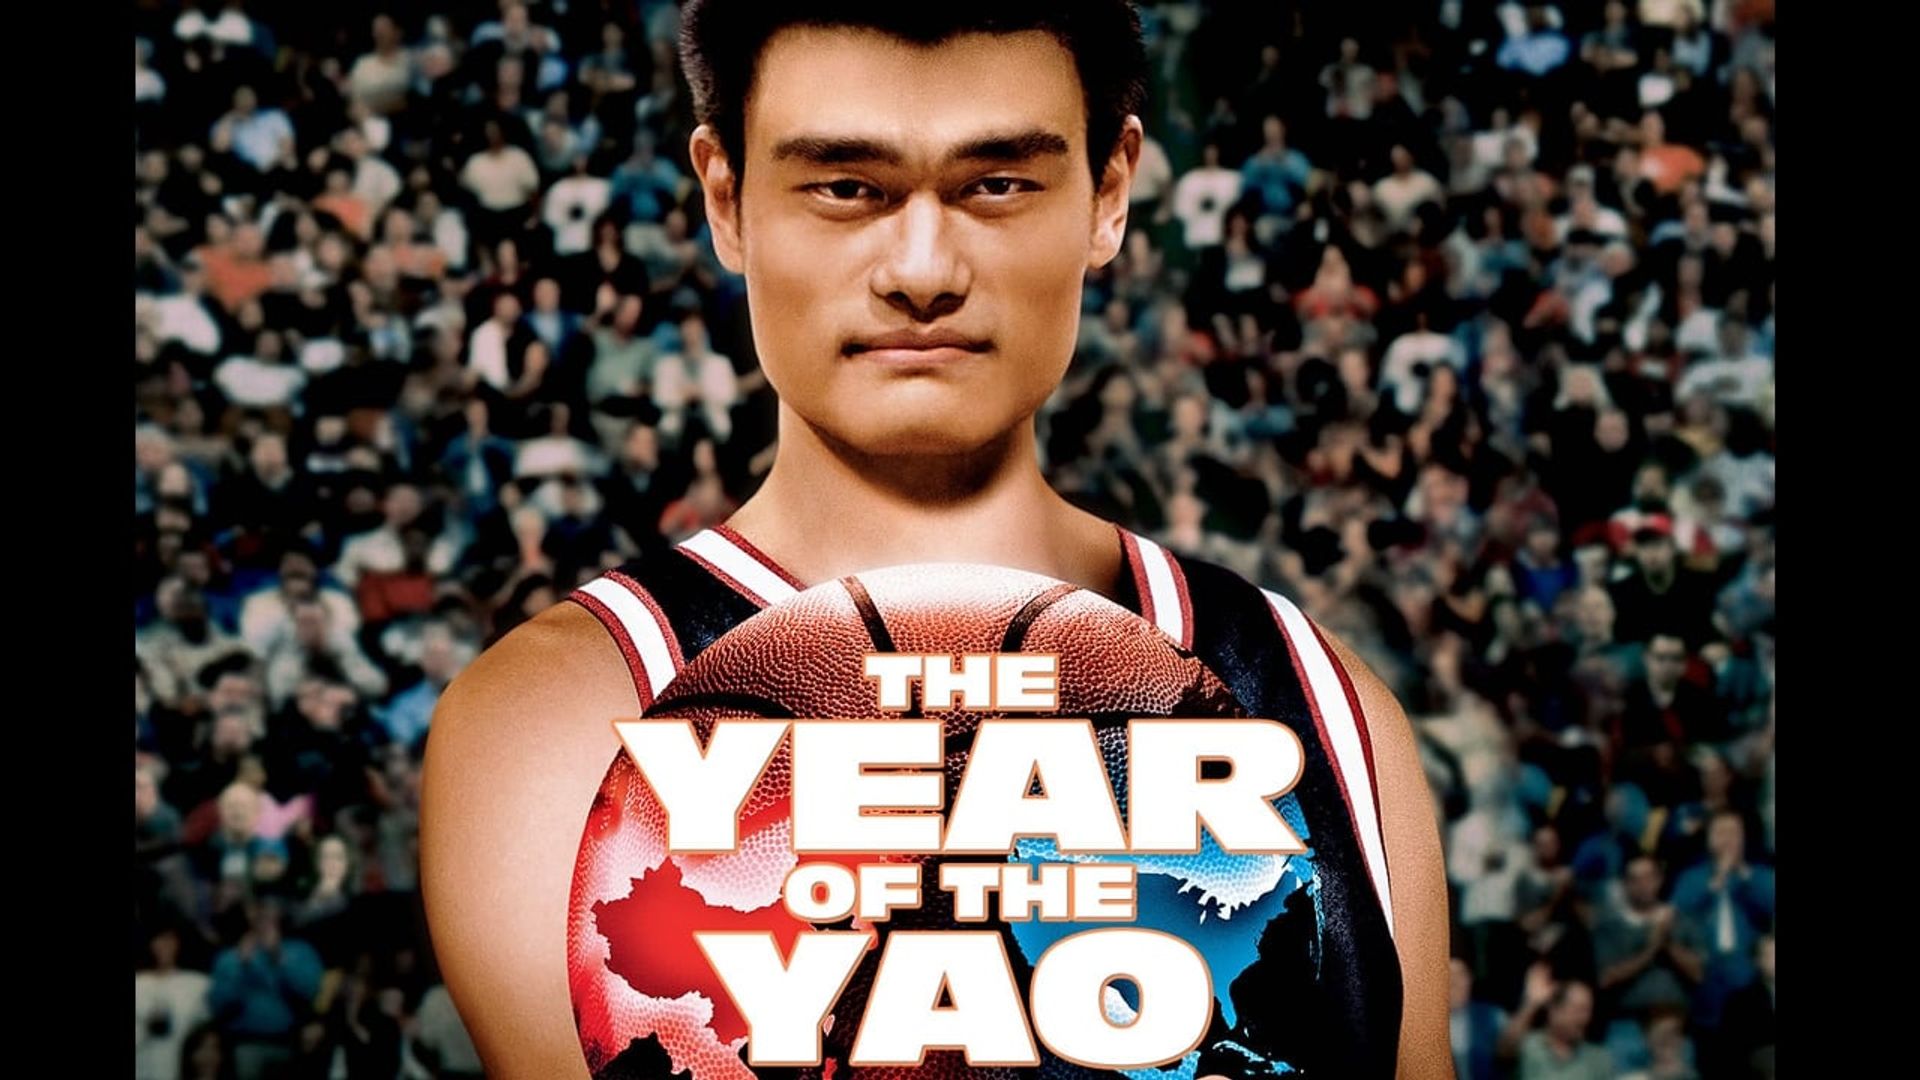 The Year of the Yao background